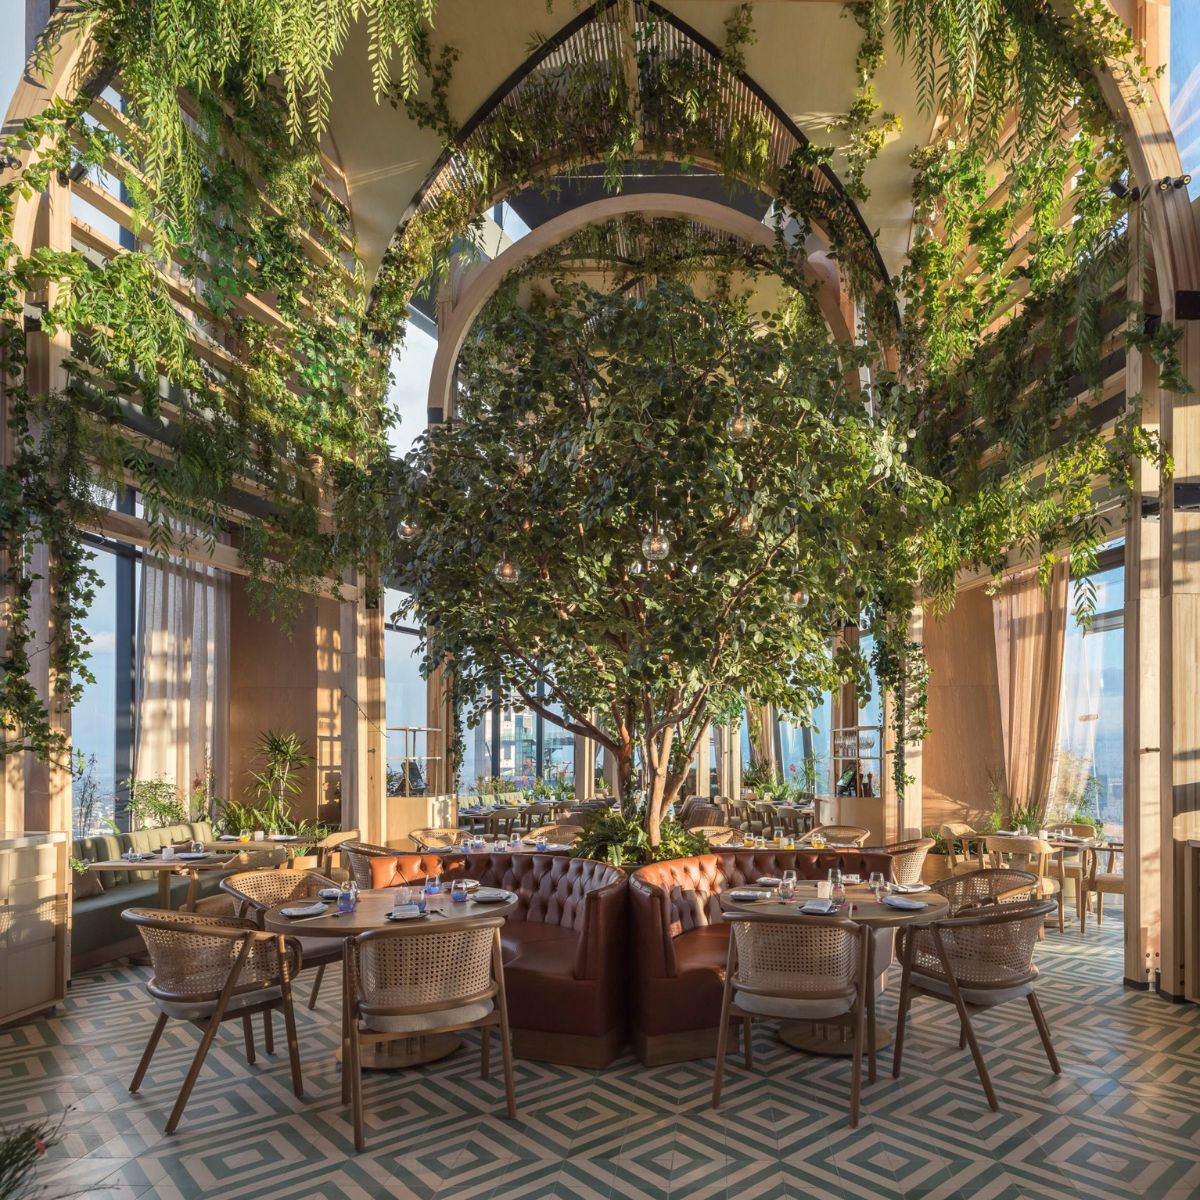 Dive deep in a world full of green plants and trees in Ling Ling restaurant located in Mexico City on Thursd